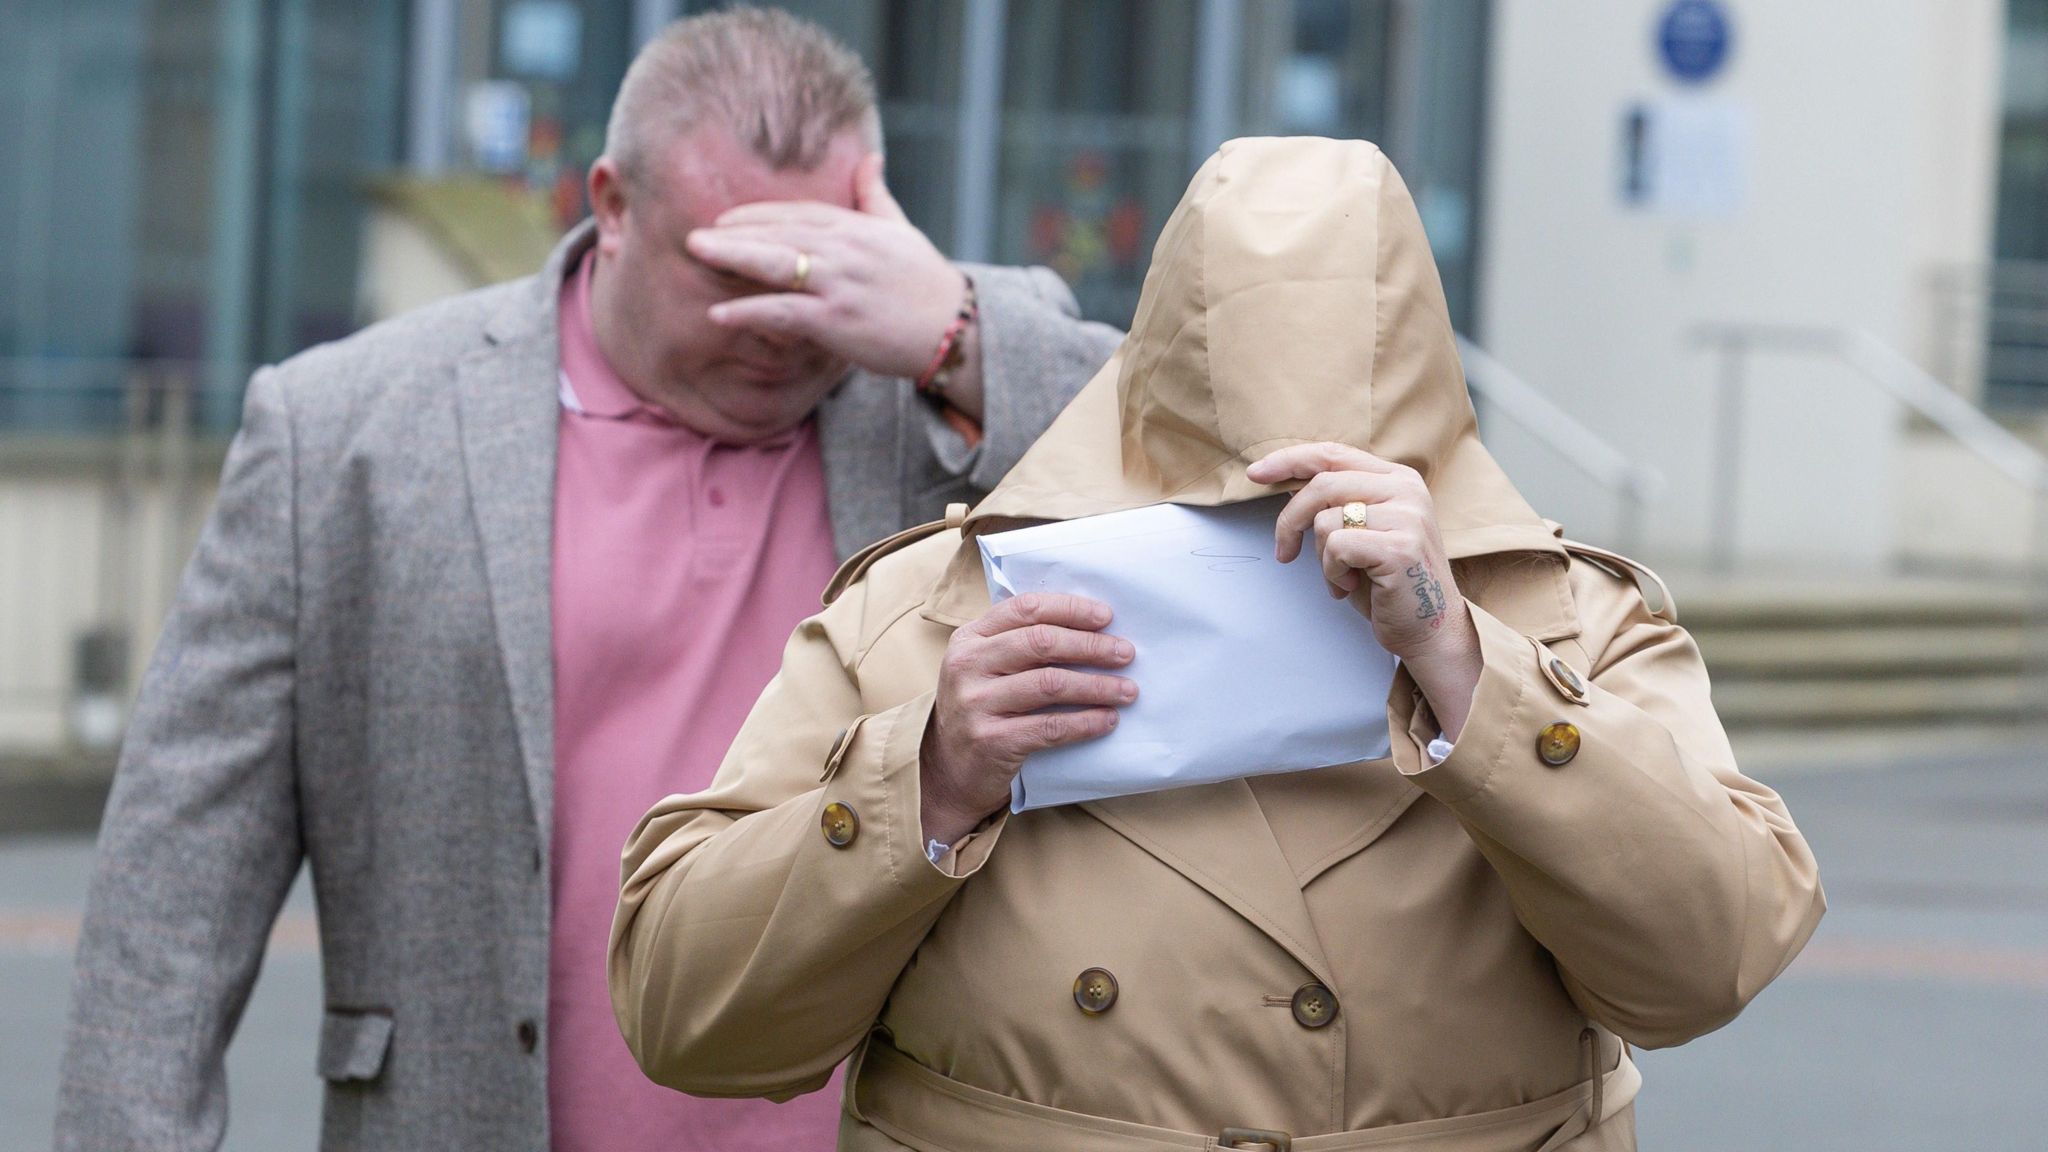 Bernard Mcdonagh in a pink shirt and grey jacket covering his face stood behind Ann McDonagh who is wearing a beige coat with a letter covering her face